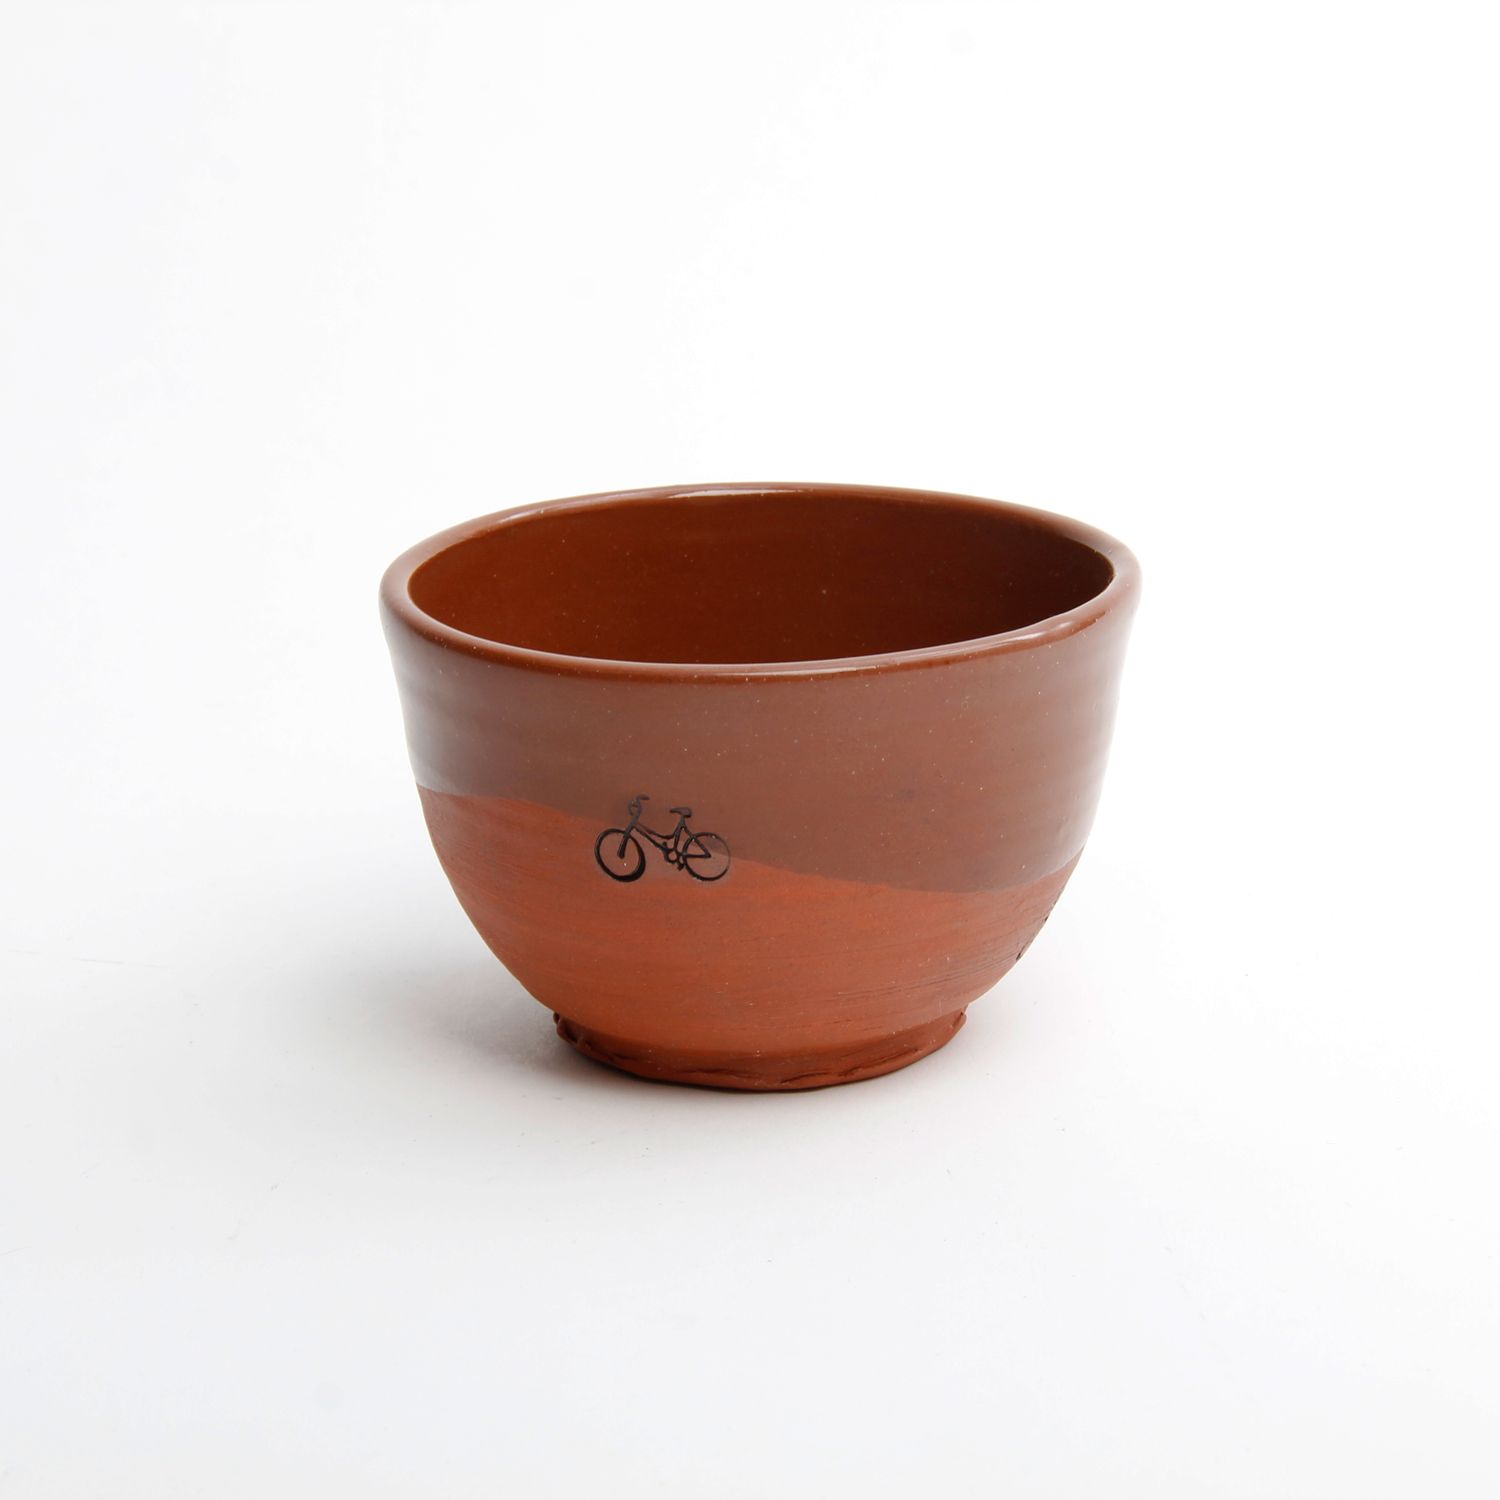 Mary McKenzie: Bicycle Bowl Brown Product Image 3 of 3